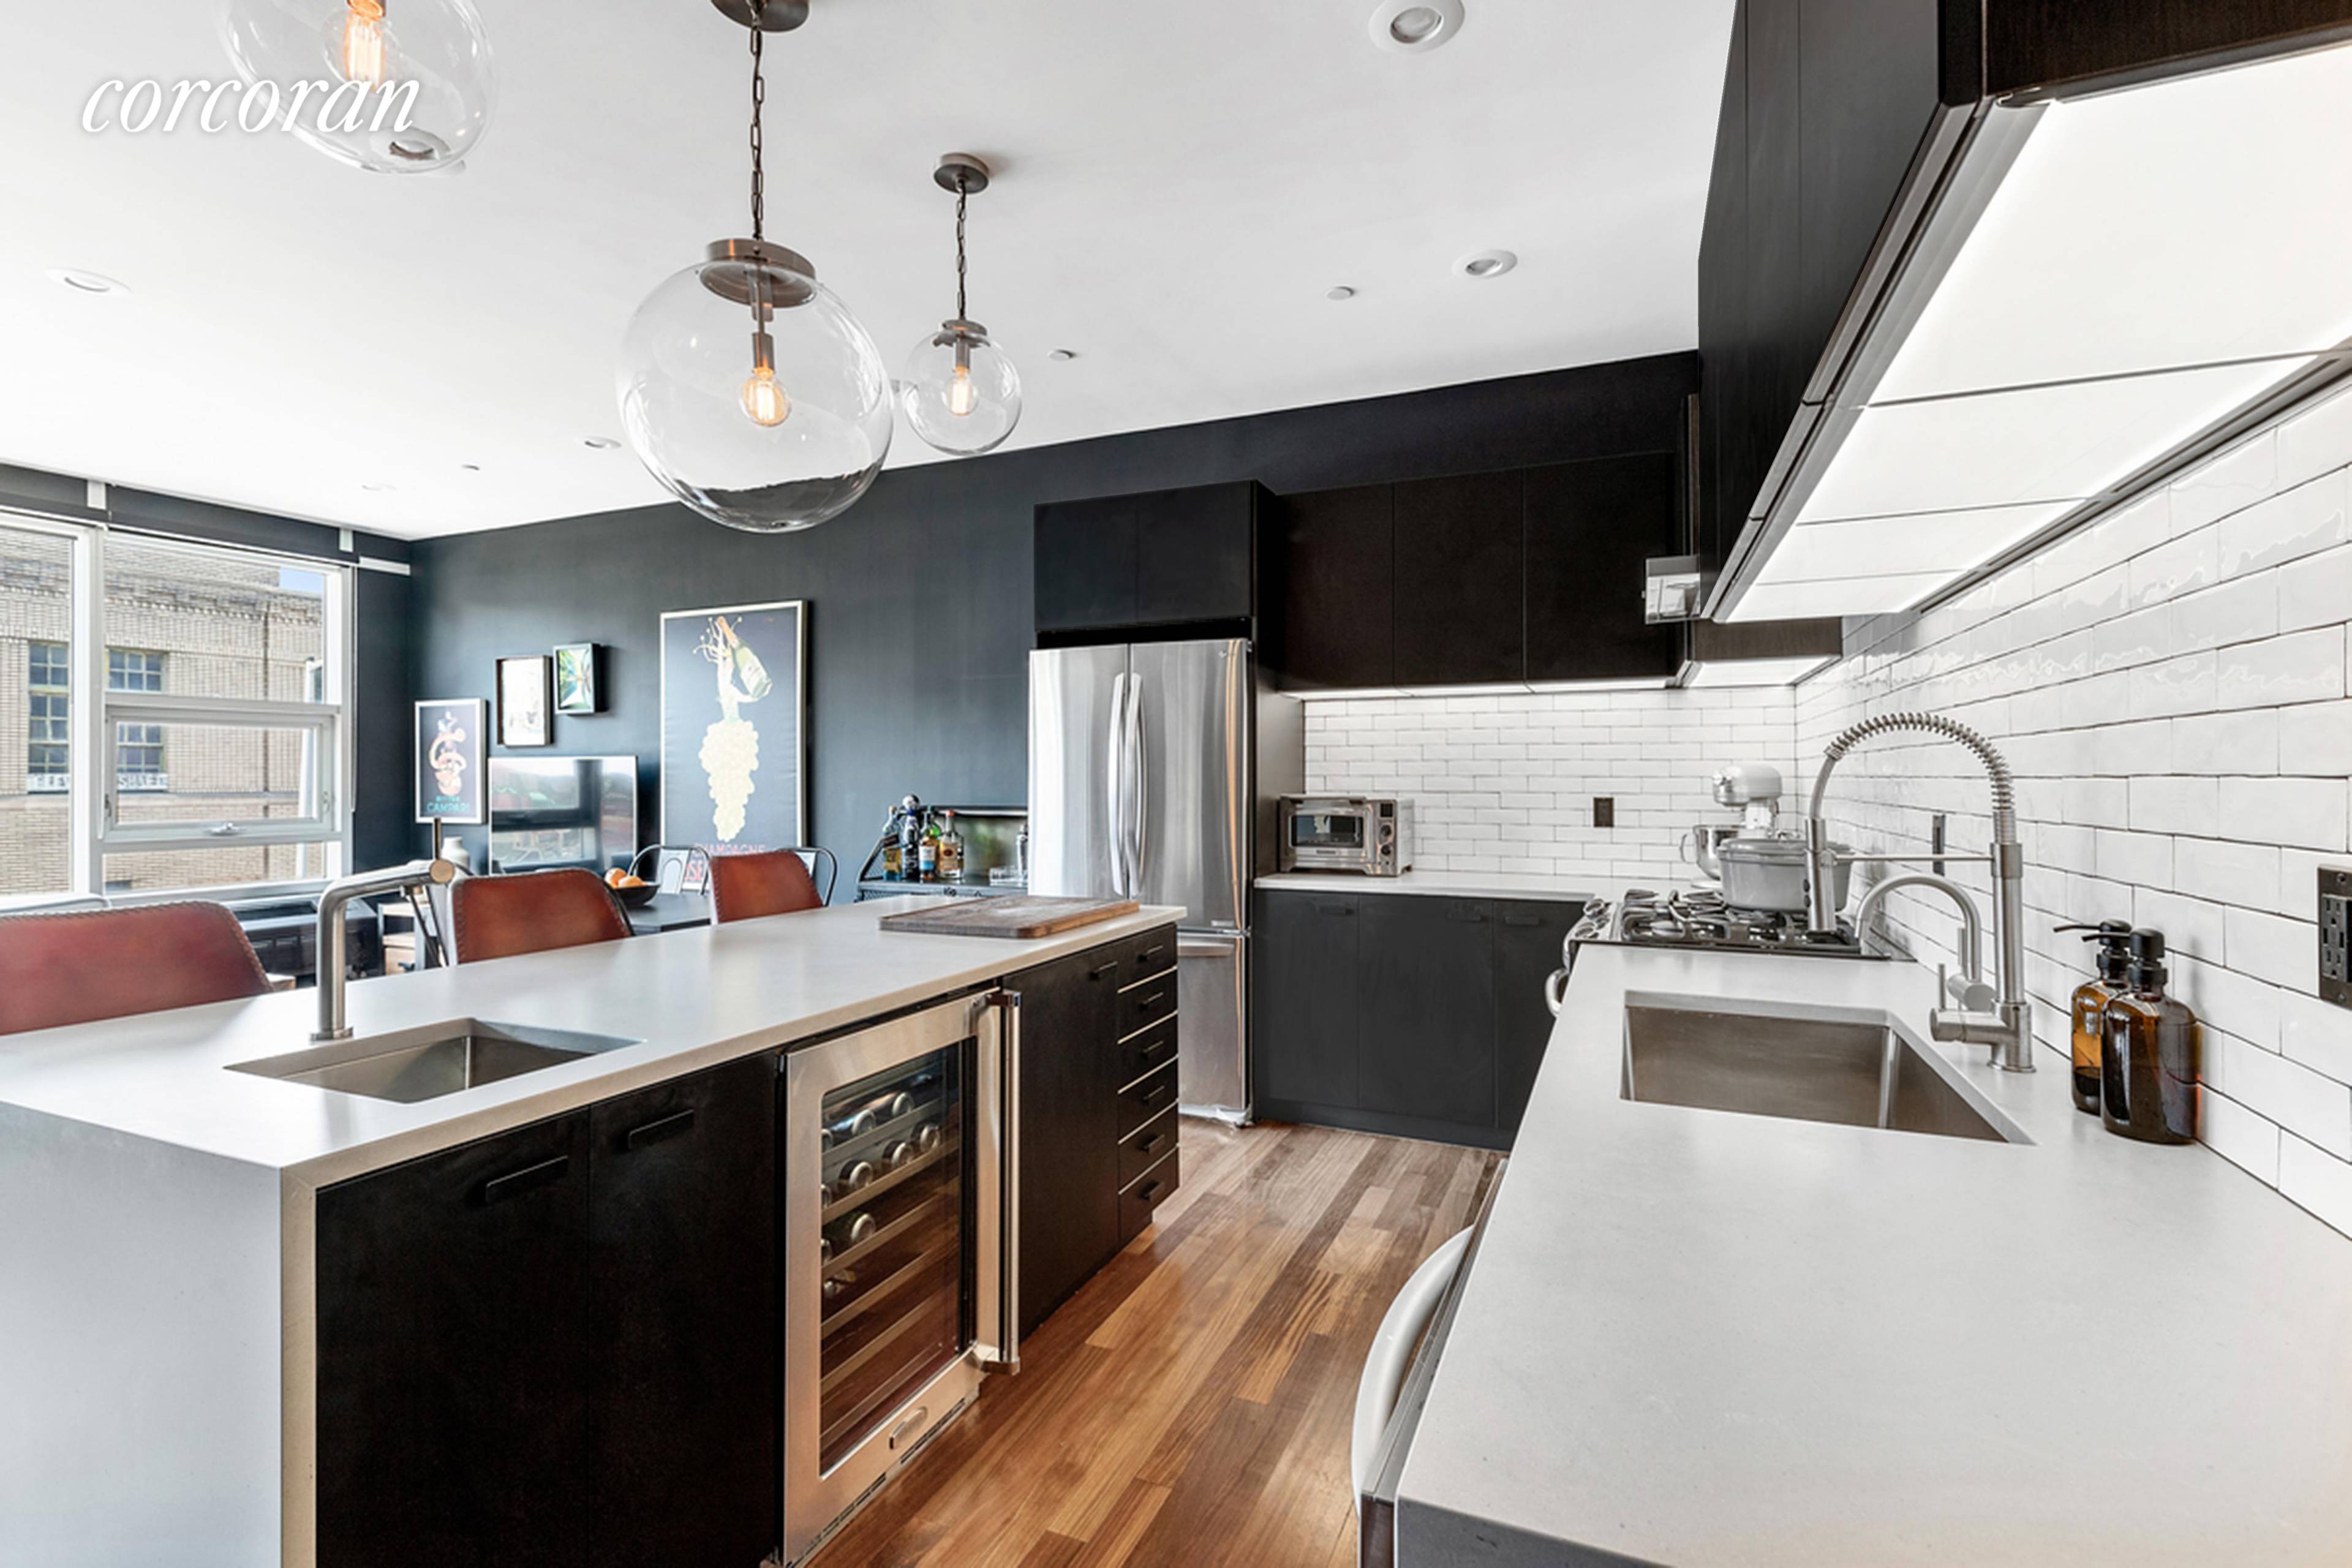 Welcome to 195 Classon Ave unit 2A, a beautifully renovated floor through 2 bedroom, 2 bathroom apartment located on the border of Clinton Hill and Bed Stuy.